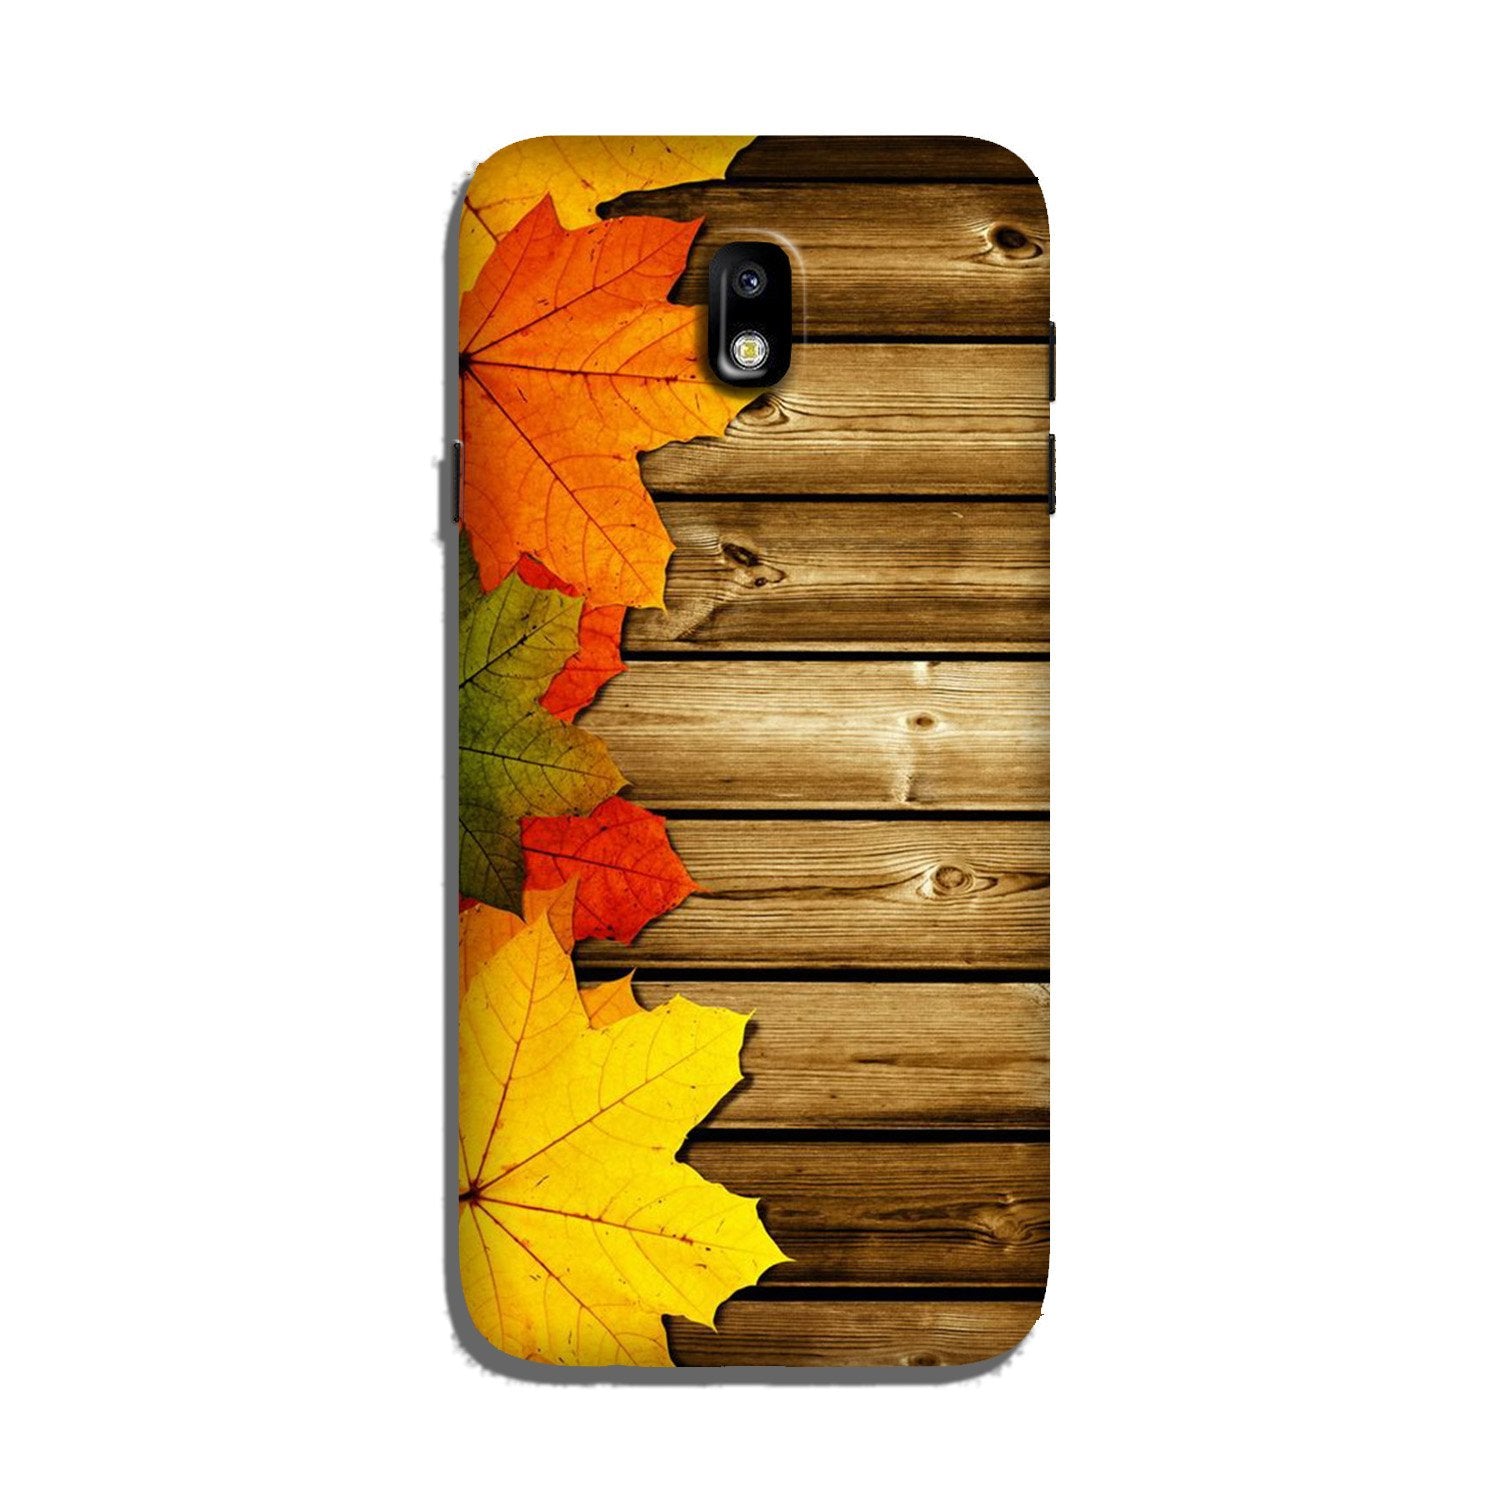 Wooden look3 Case for Galaxy J7 Pro